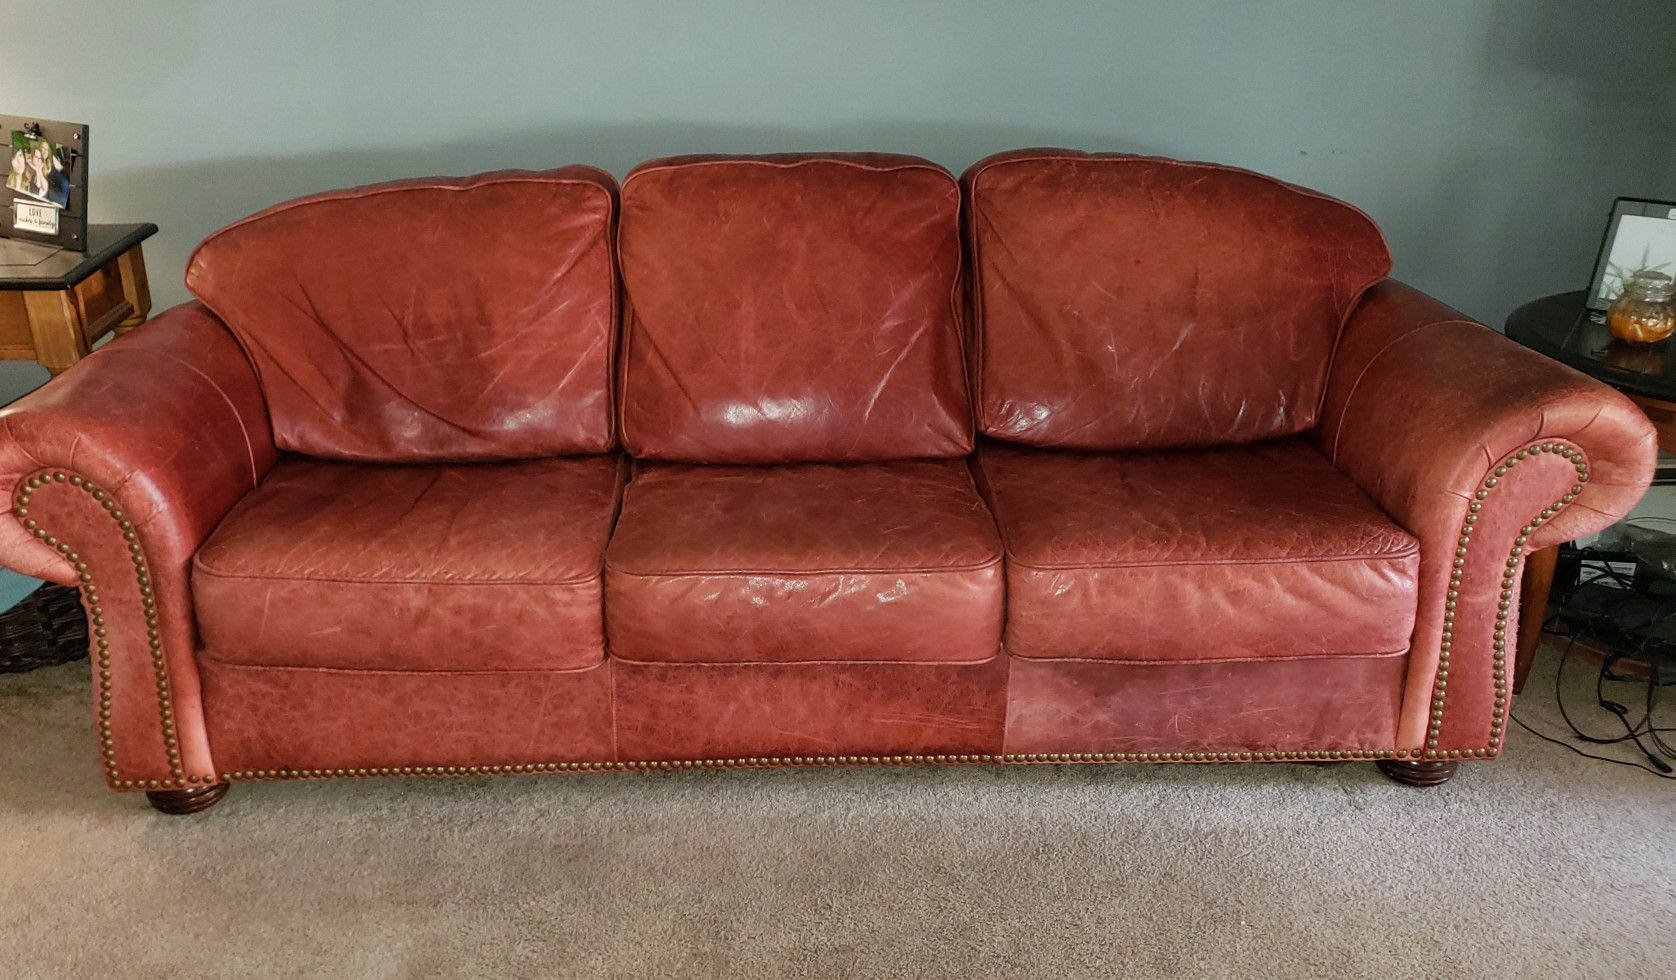 Red leather couch free